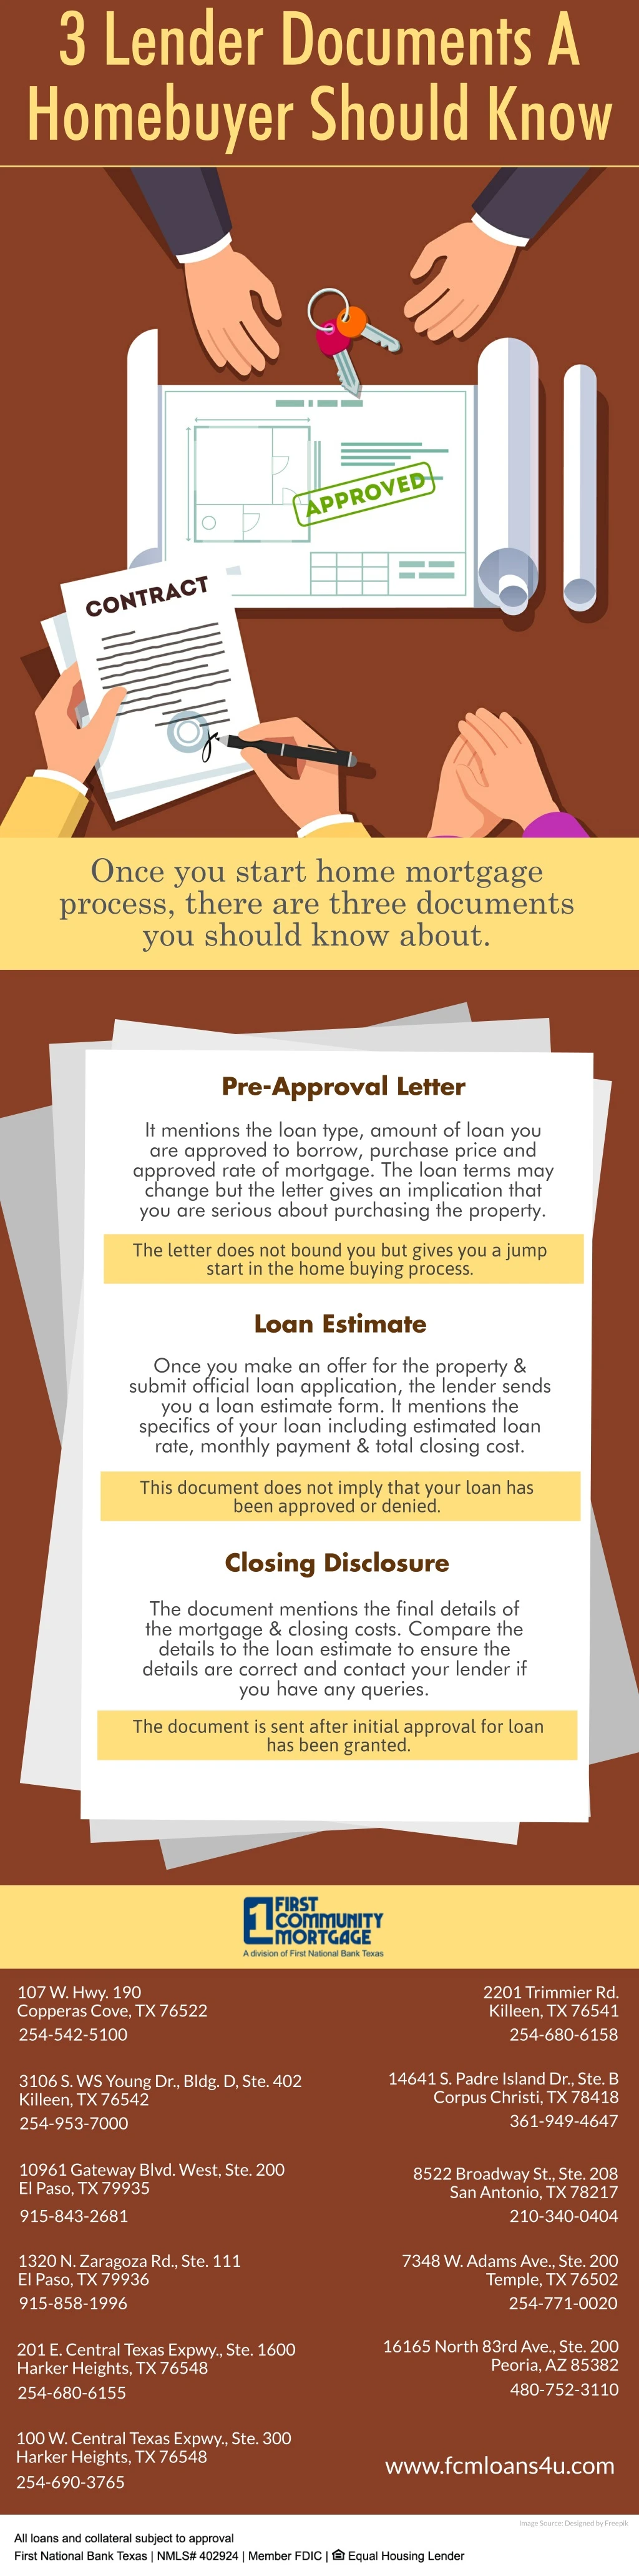 3 lender documents a homebuyer should know